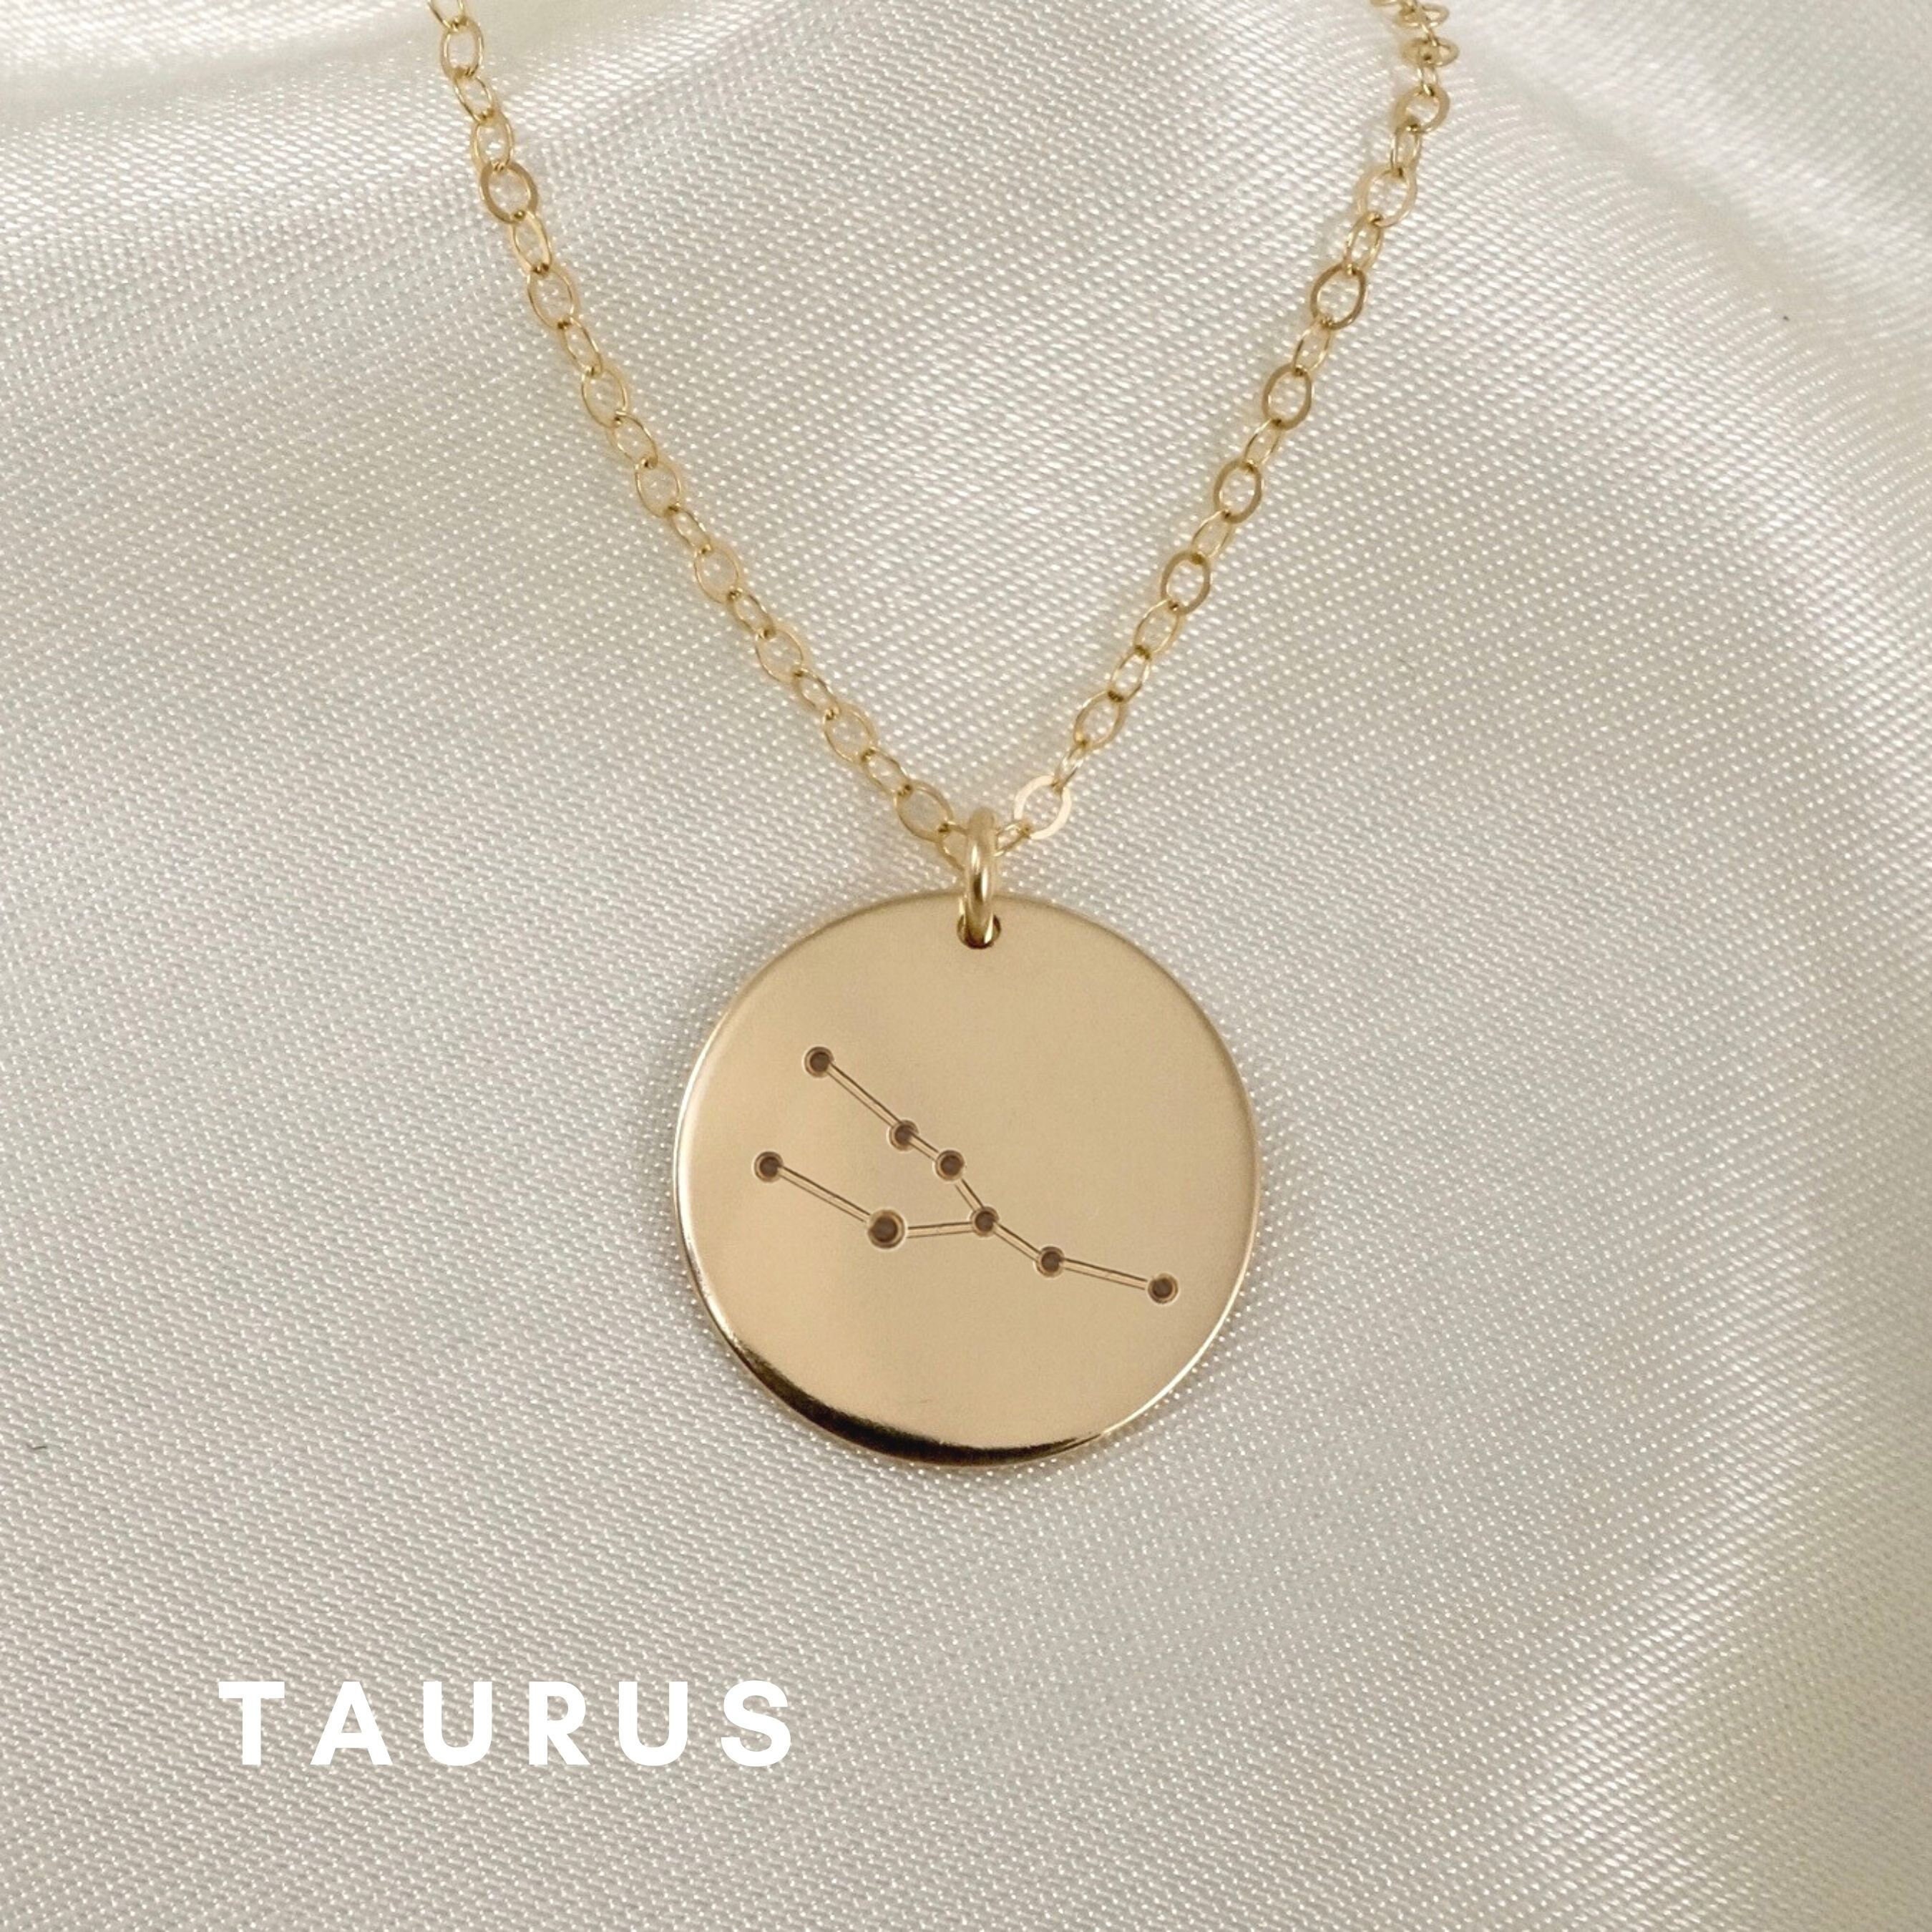 Taurus Constellation Horoscope Zodiac Necklace 18k Gold Stainless Steel Dog  Tag 24